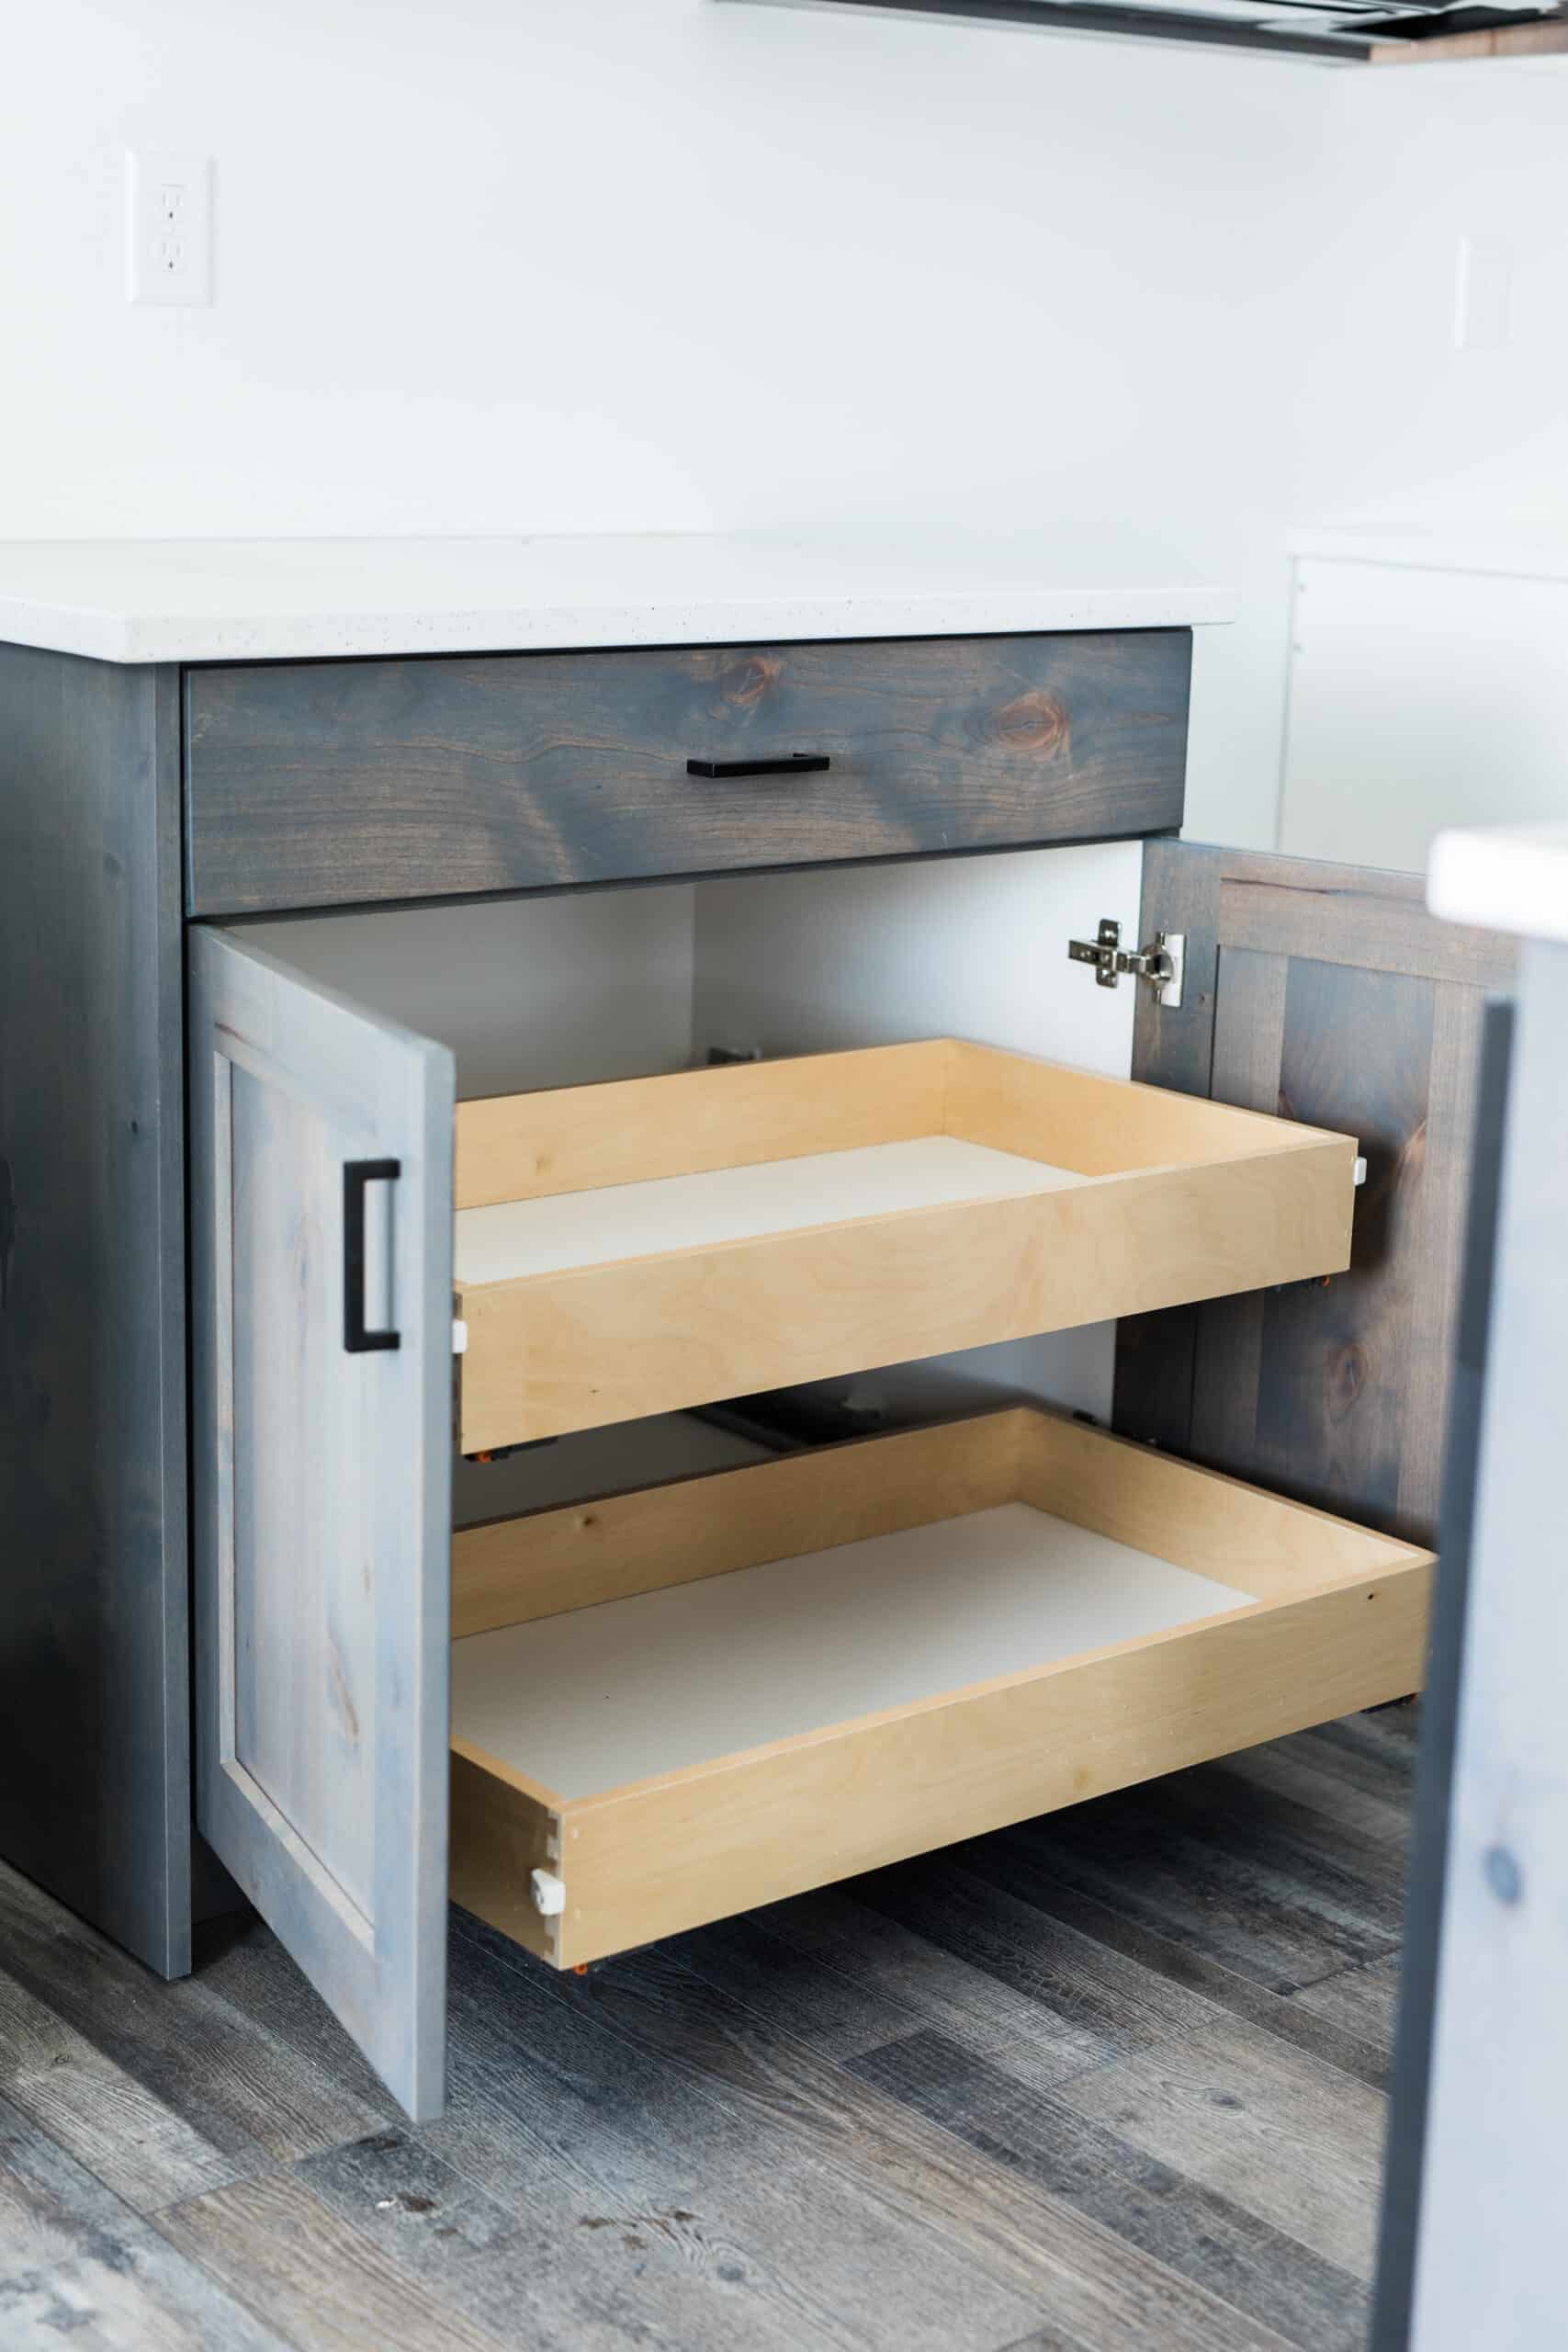 Organization For Your Cabinets